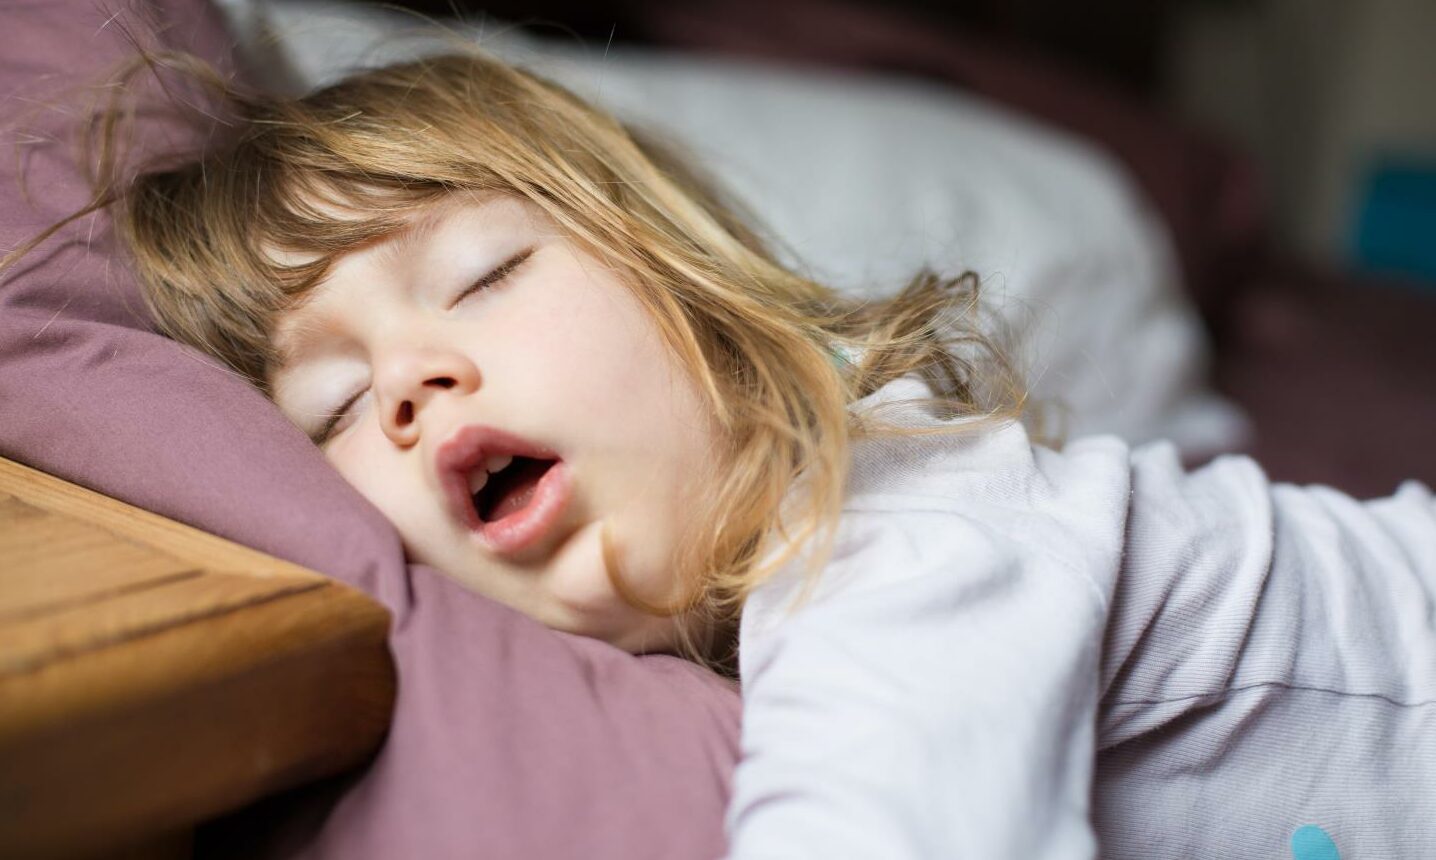 How to stop snoring: Children tend to snore at night if they have enlarged tonsils or adenoids.